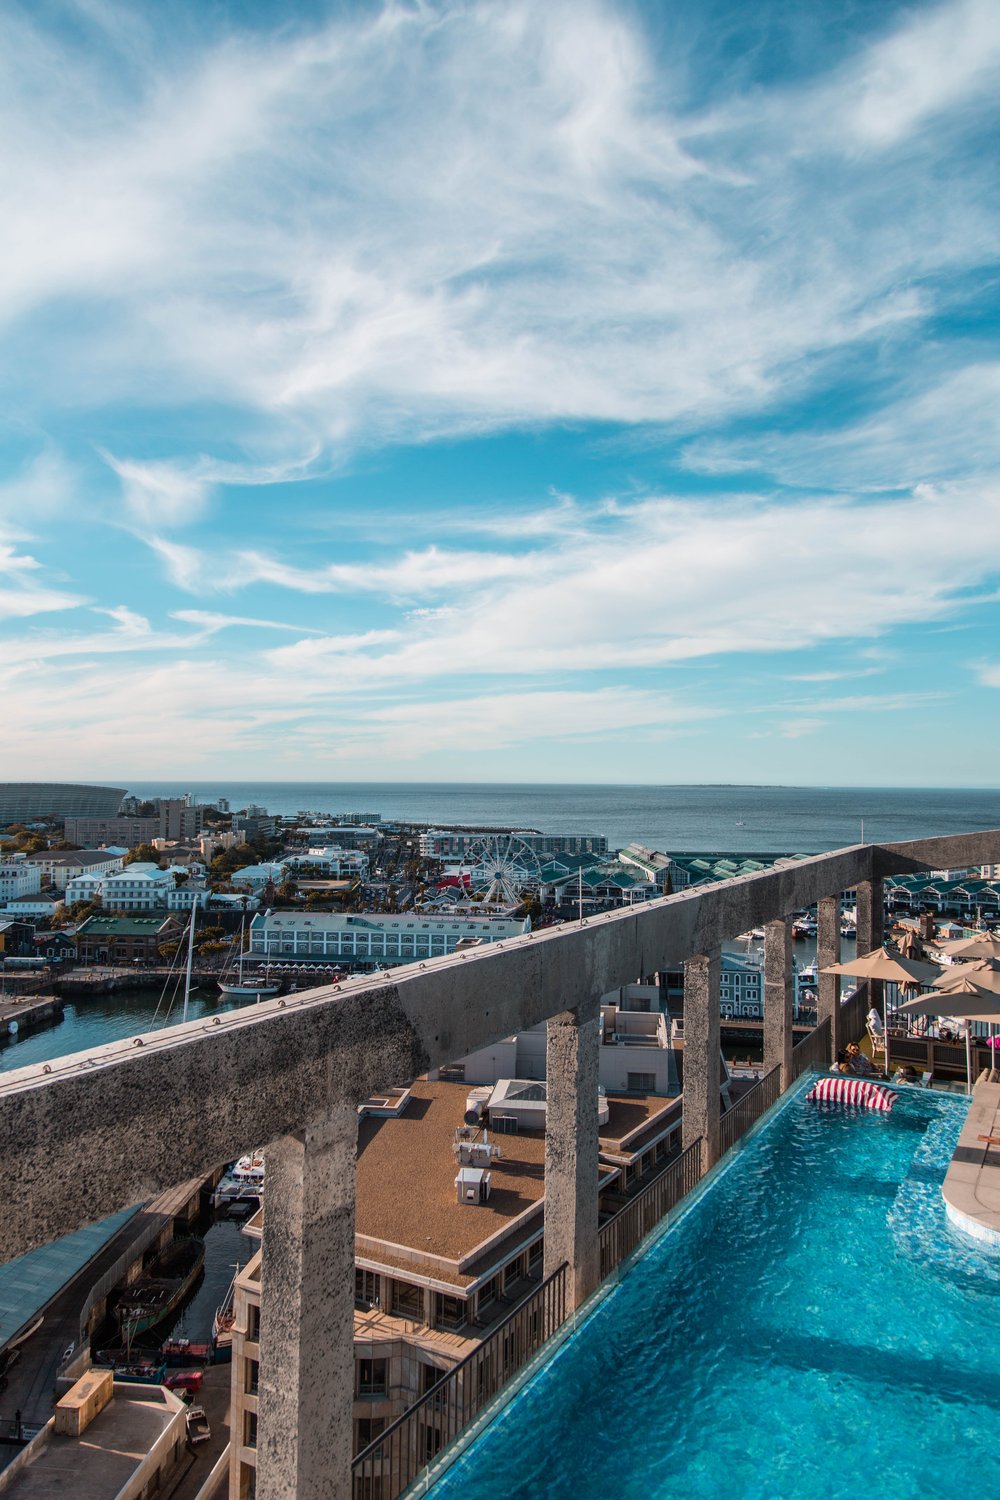 H-Capetown-Silo-Rooftop &Pool (1).jpeg